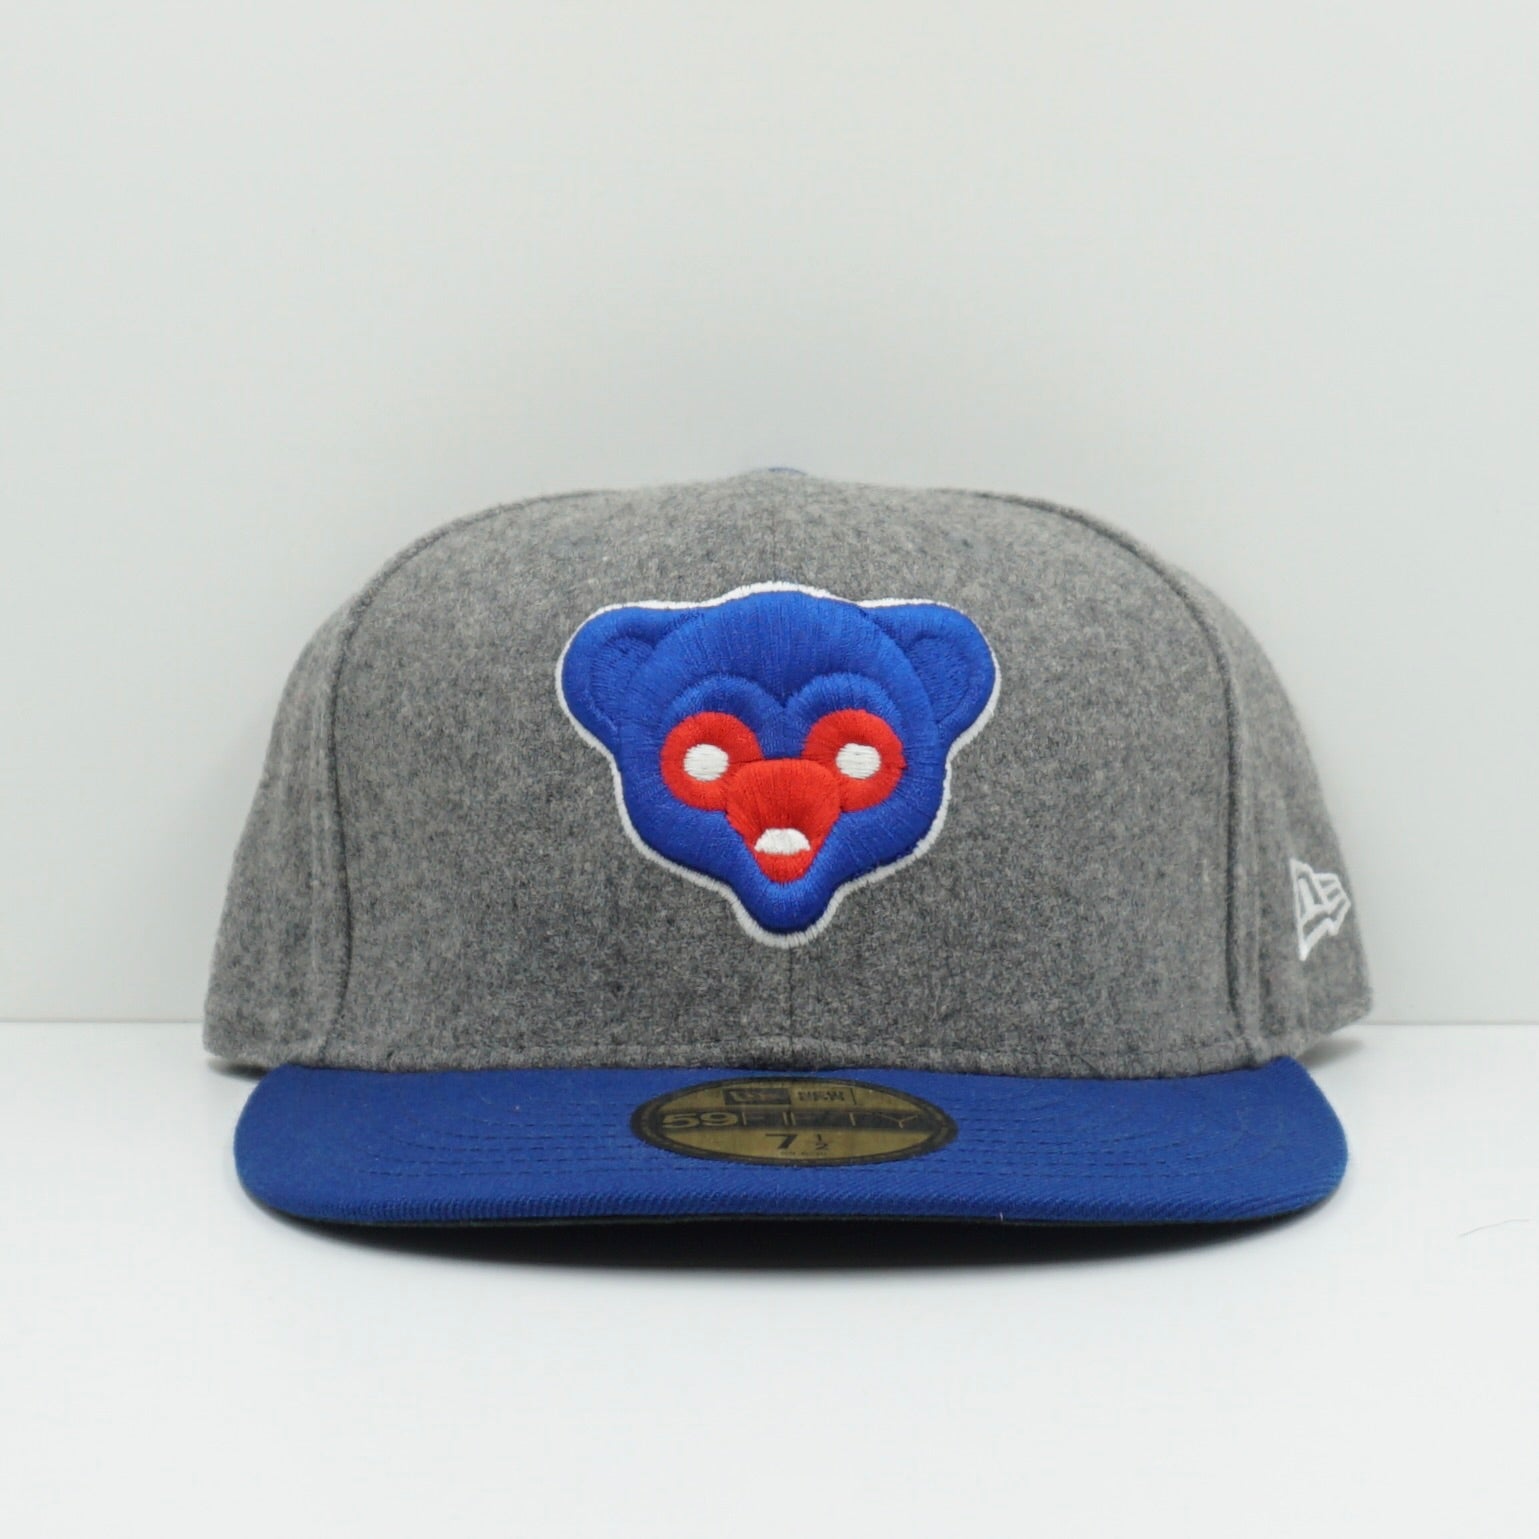 New Era Cooperstown Chicago Cubs Grey Blue Fitted Cap Sample